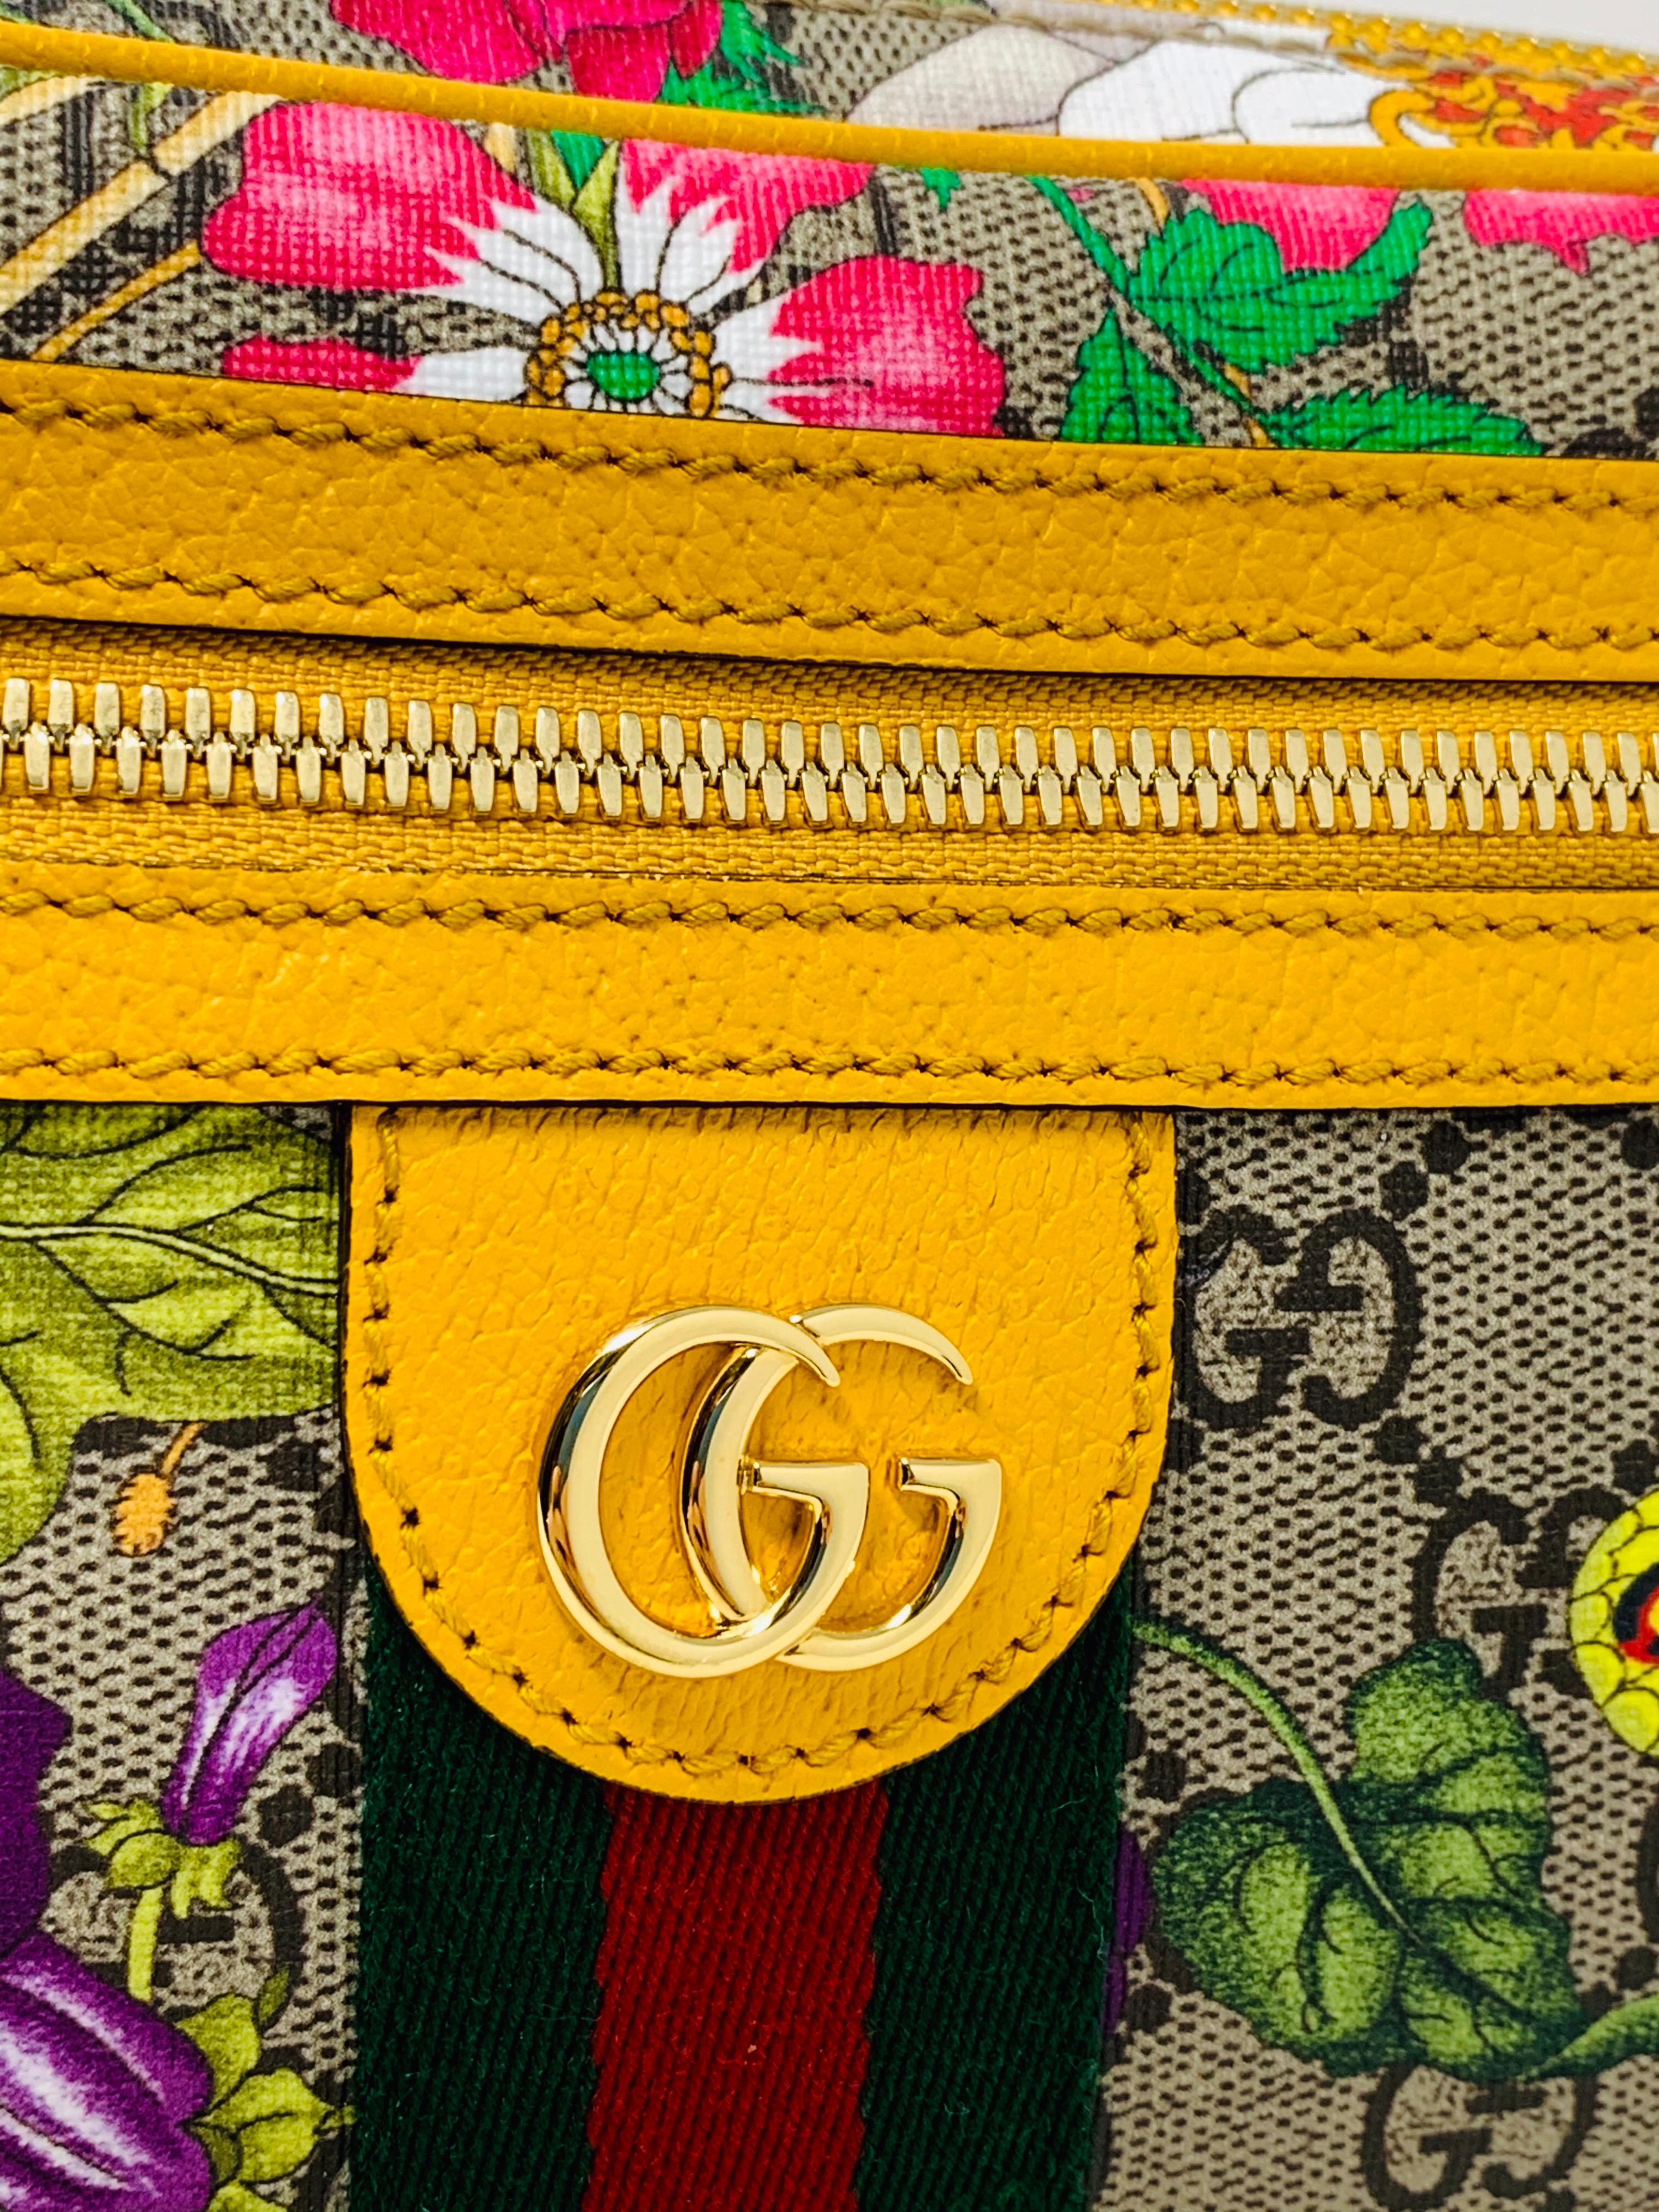 Delicious Gucci belt bag in supreme GG canvas with Gucci flora details, mustard yellow leather inserts, adjustable shoulder strap, never worn, complete with its original dust bag.
  Dimensions 24x14 cm
  Great gift idea
  Interior in cream-colored